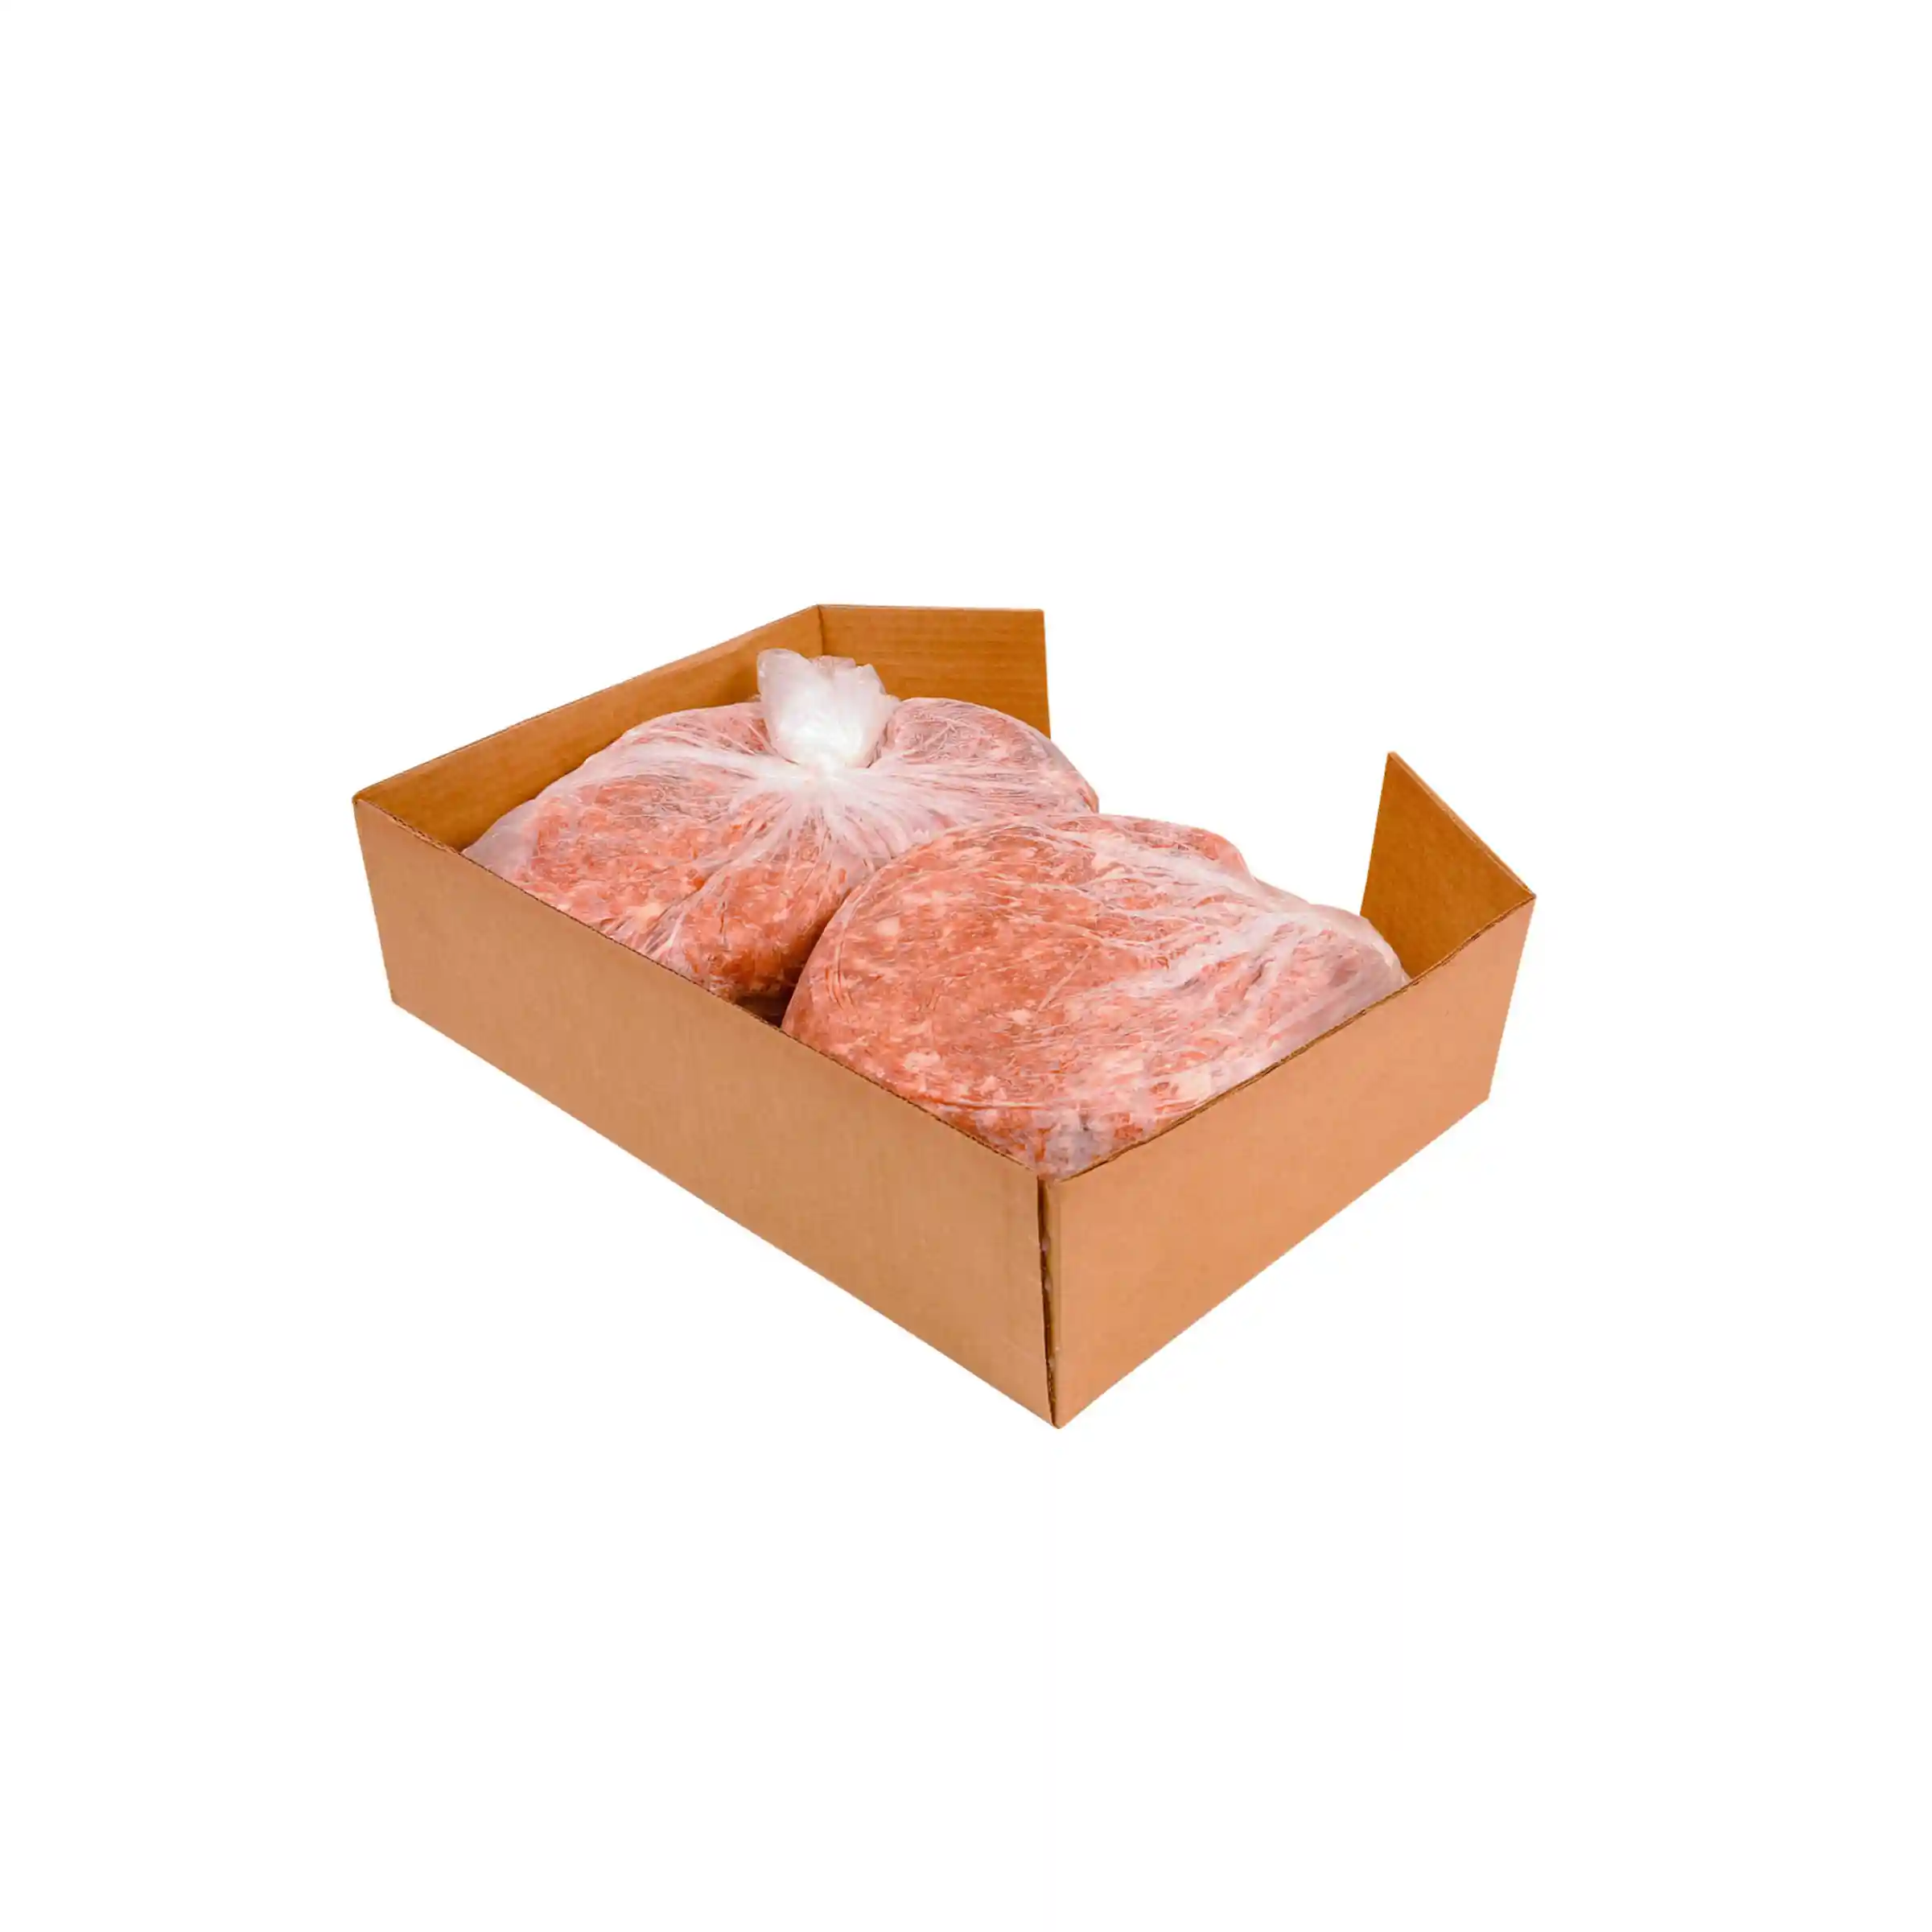 Philly Freedom® Chunked & Formed Beef Sandwich Slices_image_21